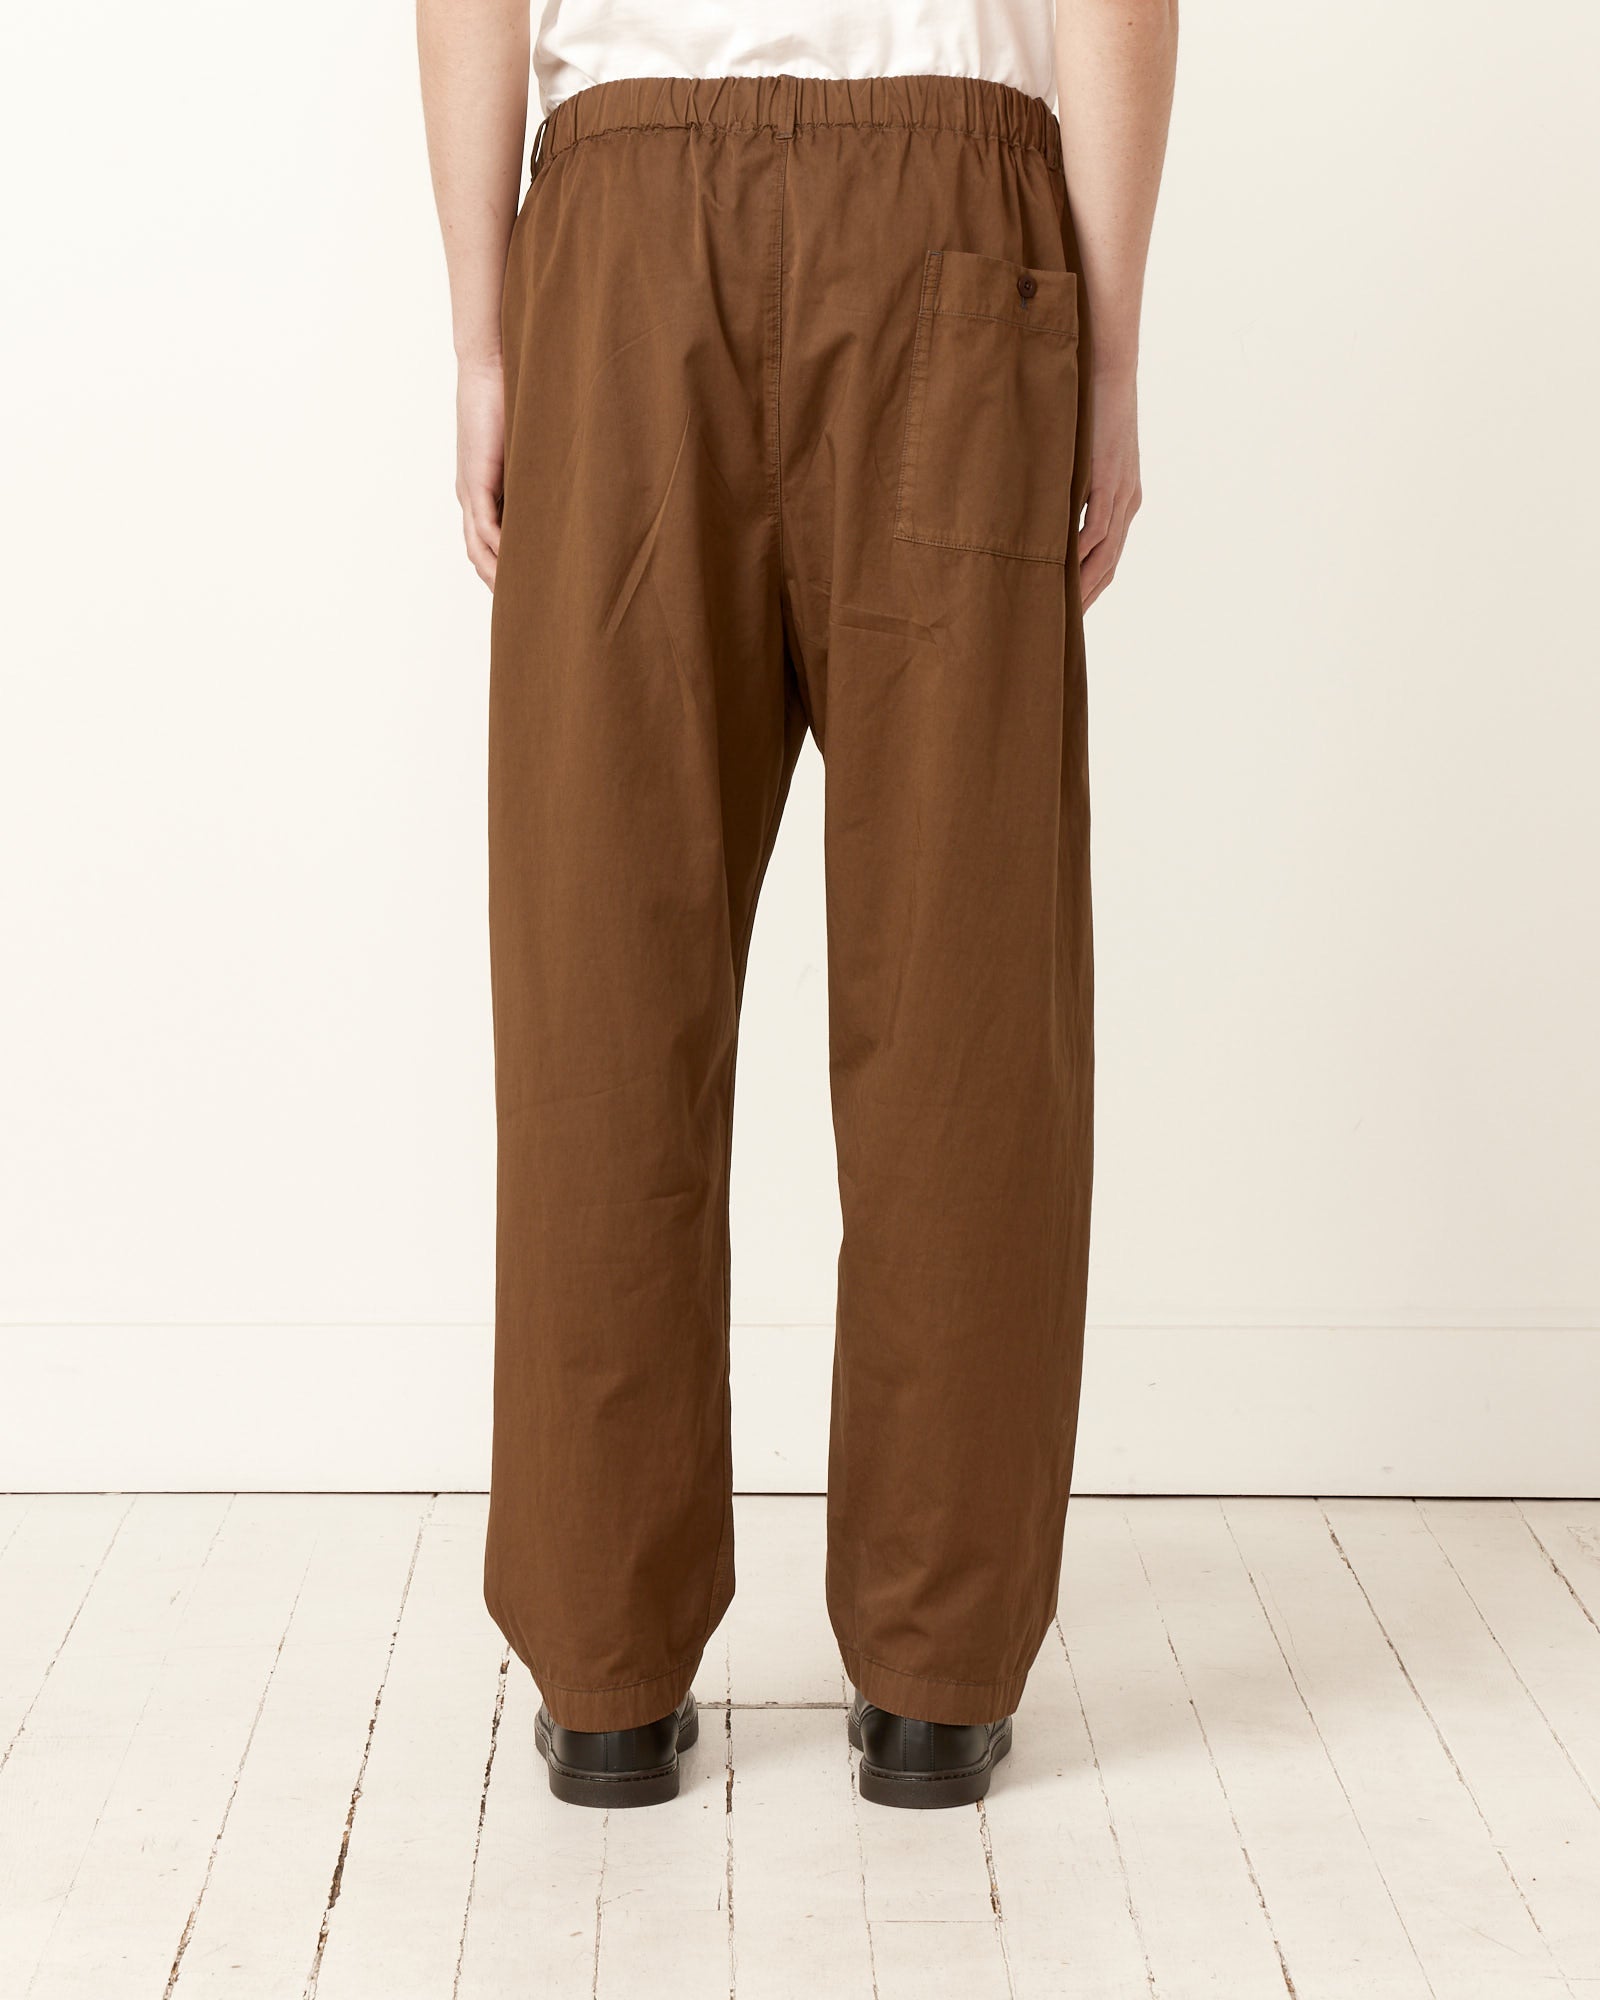 Relaxed Pants in Dark Tobacco